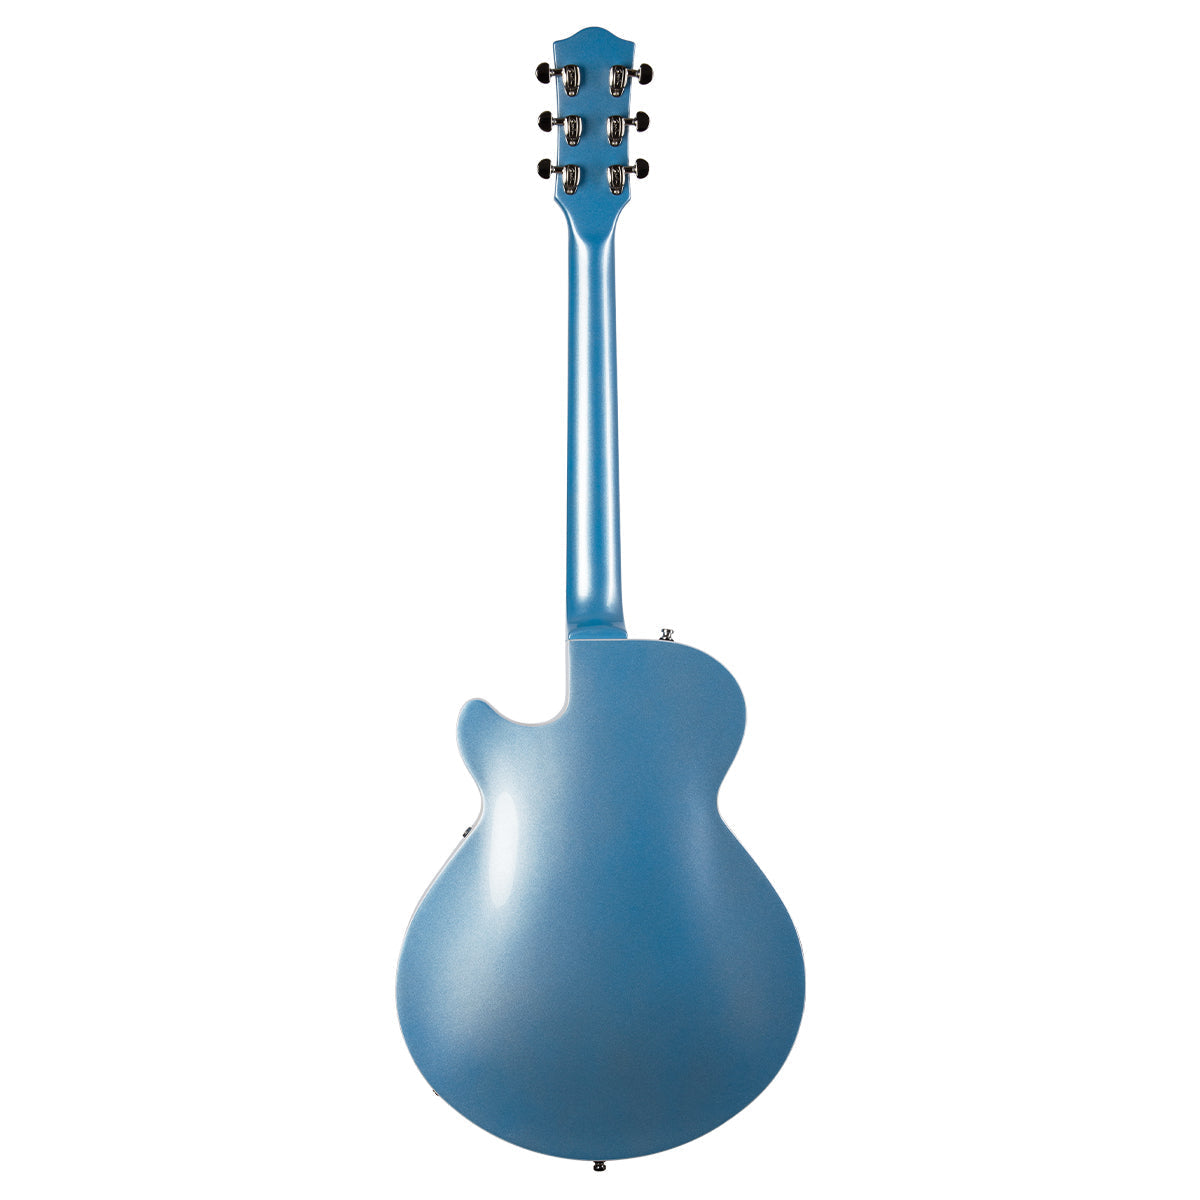 Godin Montreal Premiere LTD Imperial Semi-Acoustic Guitar ~ Blue with Bag, Electric Guitar for sale at Richards Guitars.